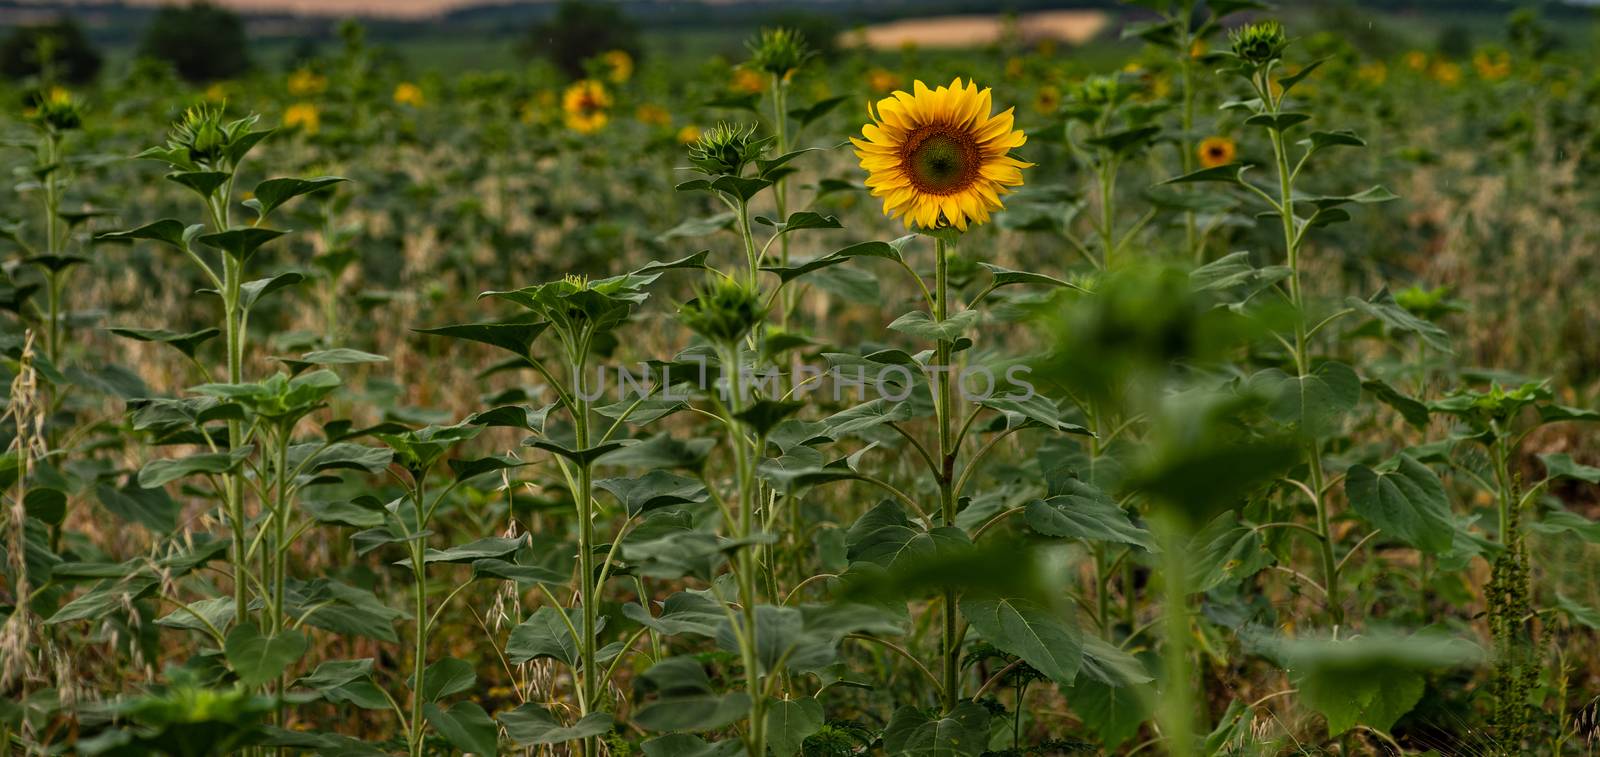 Blooming sunflower in a raining day by Elet